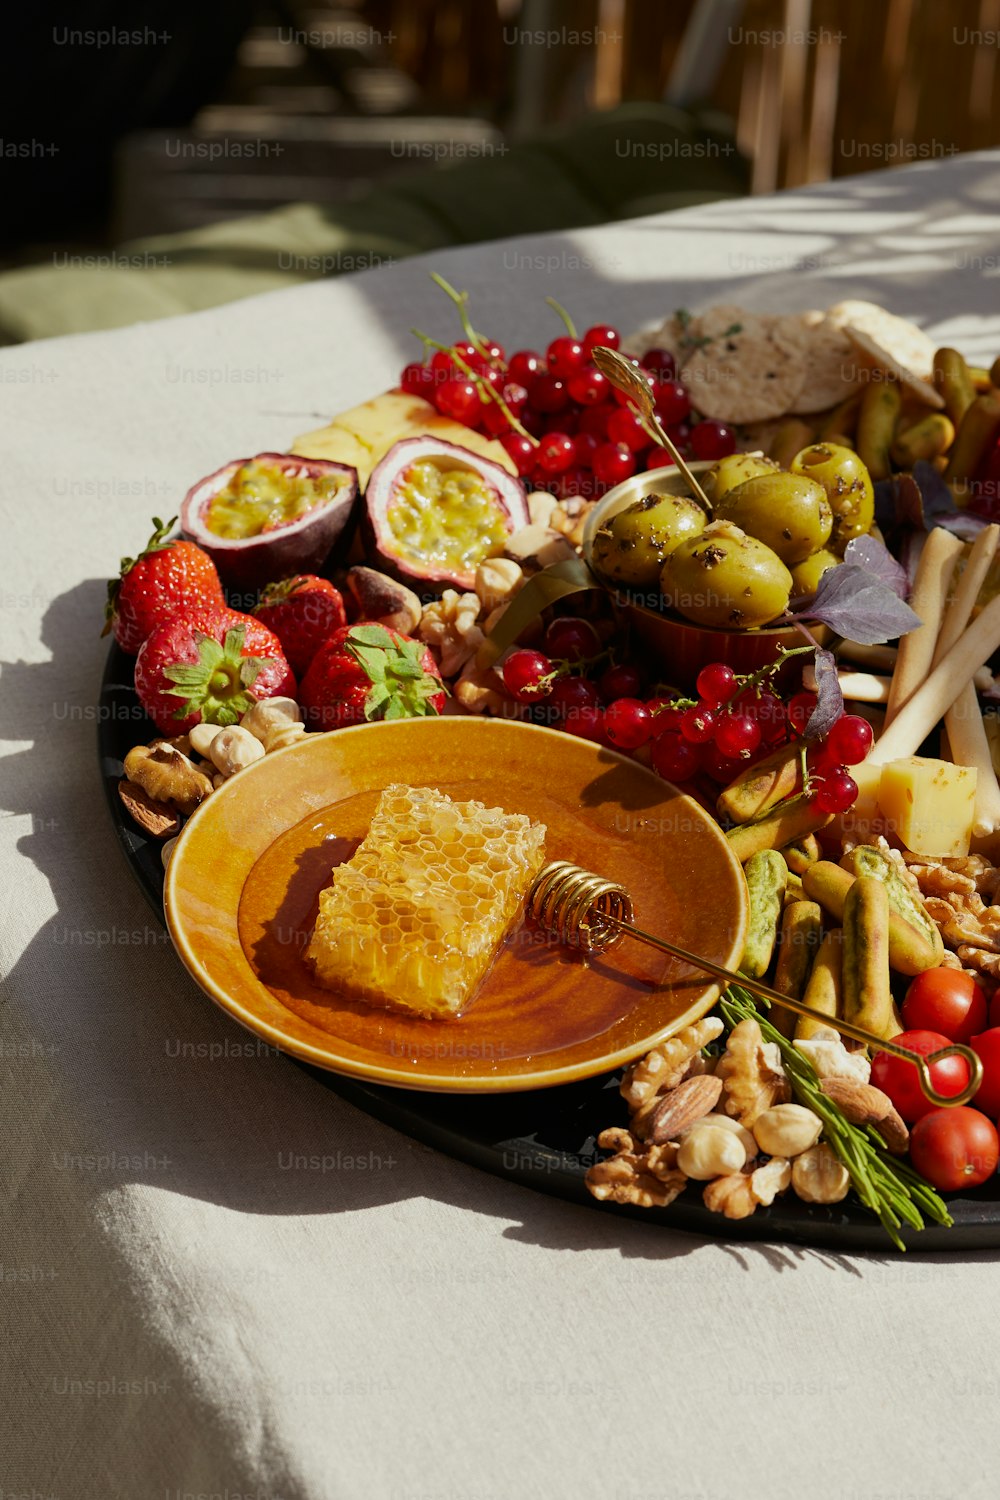 a platter of fruit, nuts, and other foods